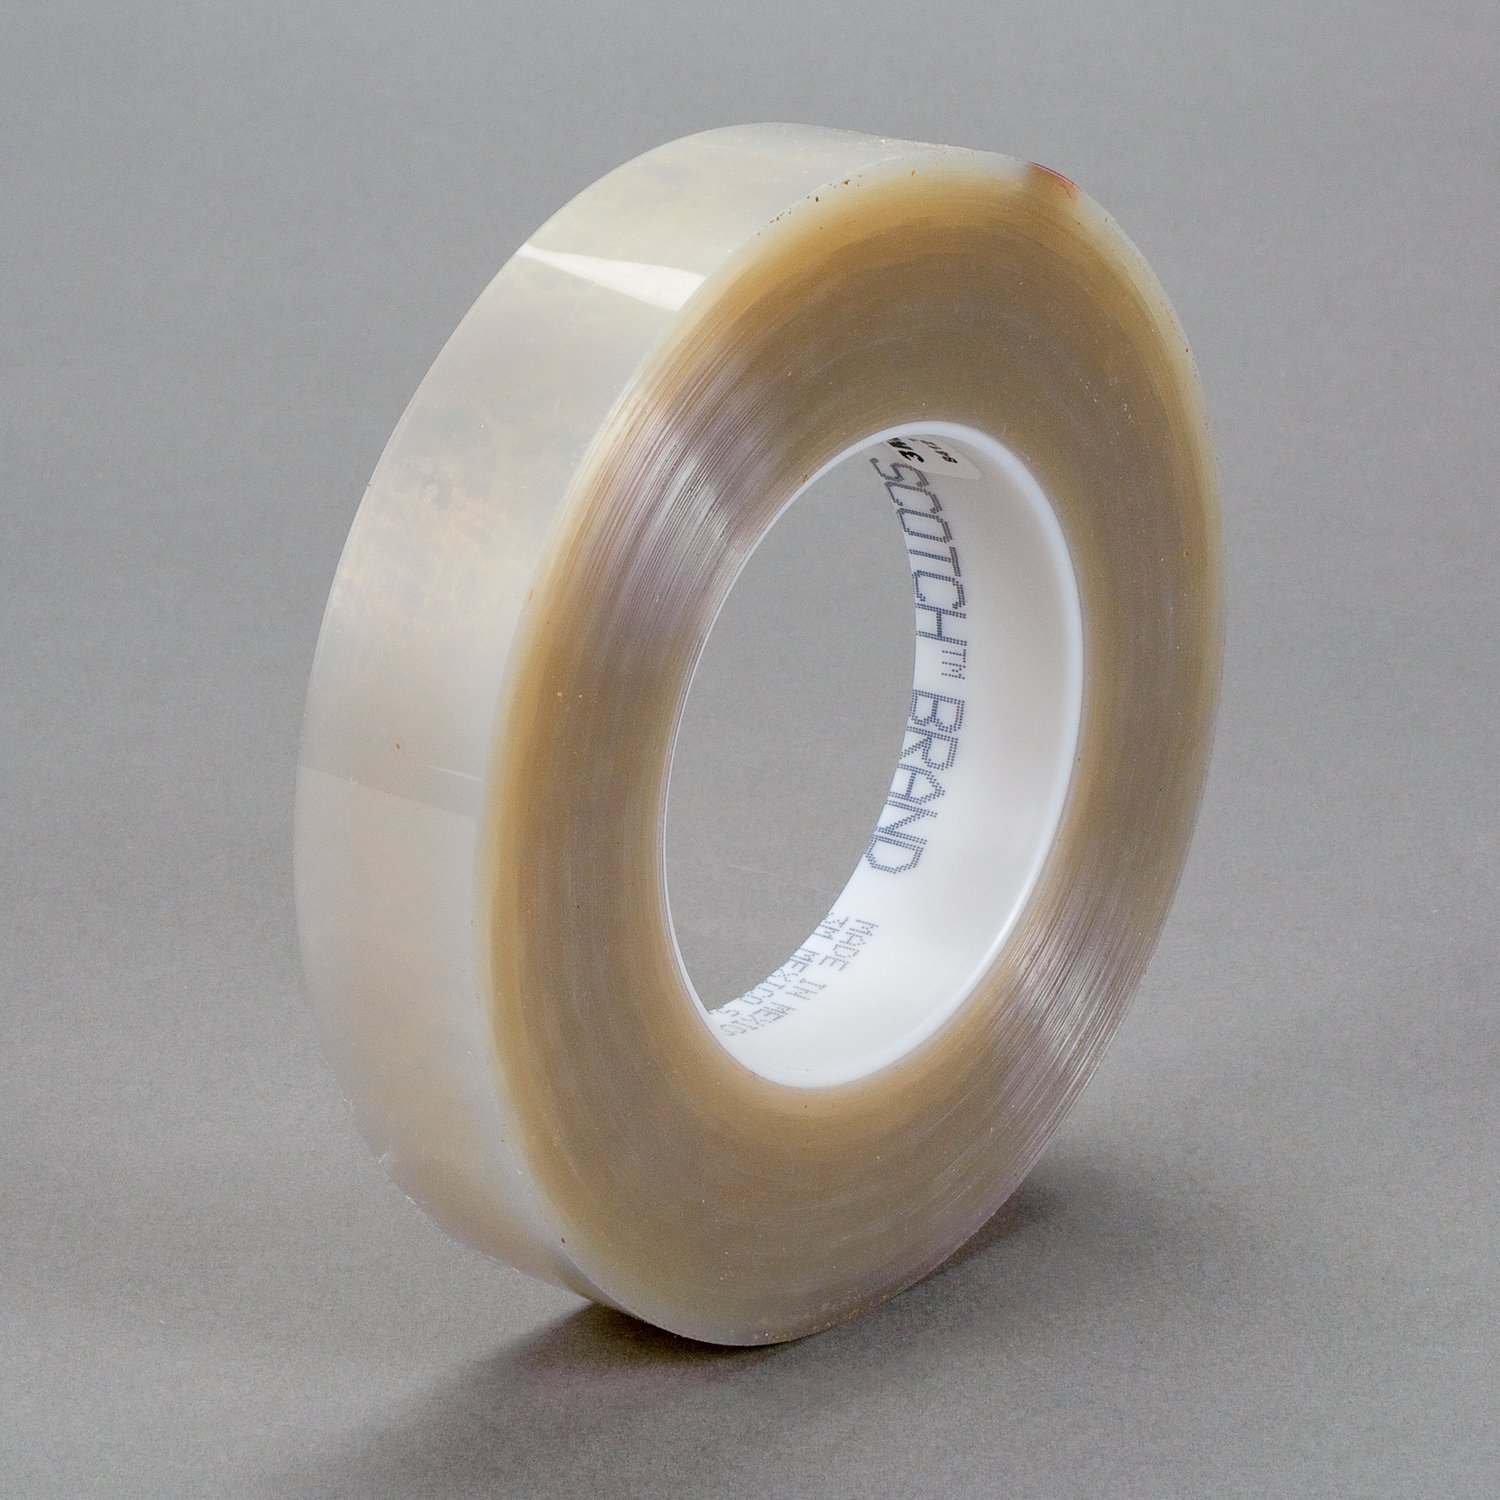 7010045031 - 3M Polyester Tape 8412, Transparent, 1/2 in x 72 yd, 6.3 mil, 72 rolls per case